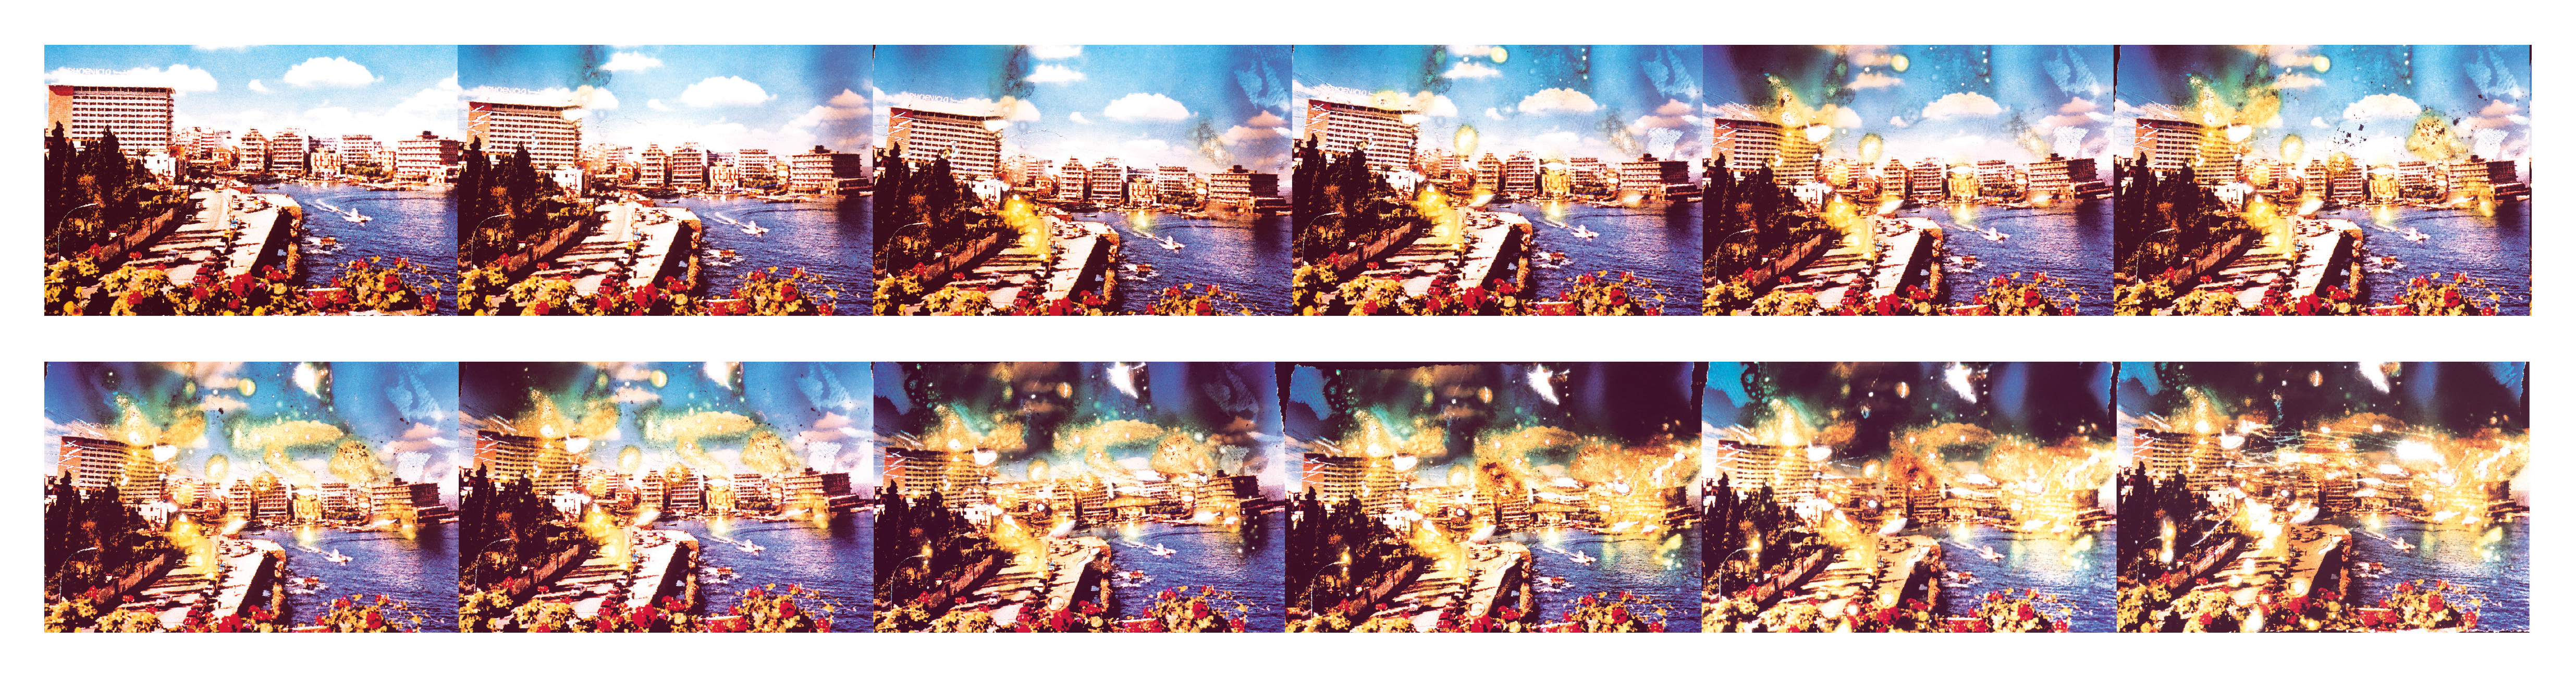 Twelve iterations of Farah’s postcard titled “Beirut: The Great Hotels Quarter” showing the step-by-step deterioration of the negative.